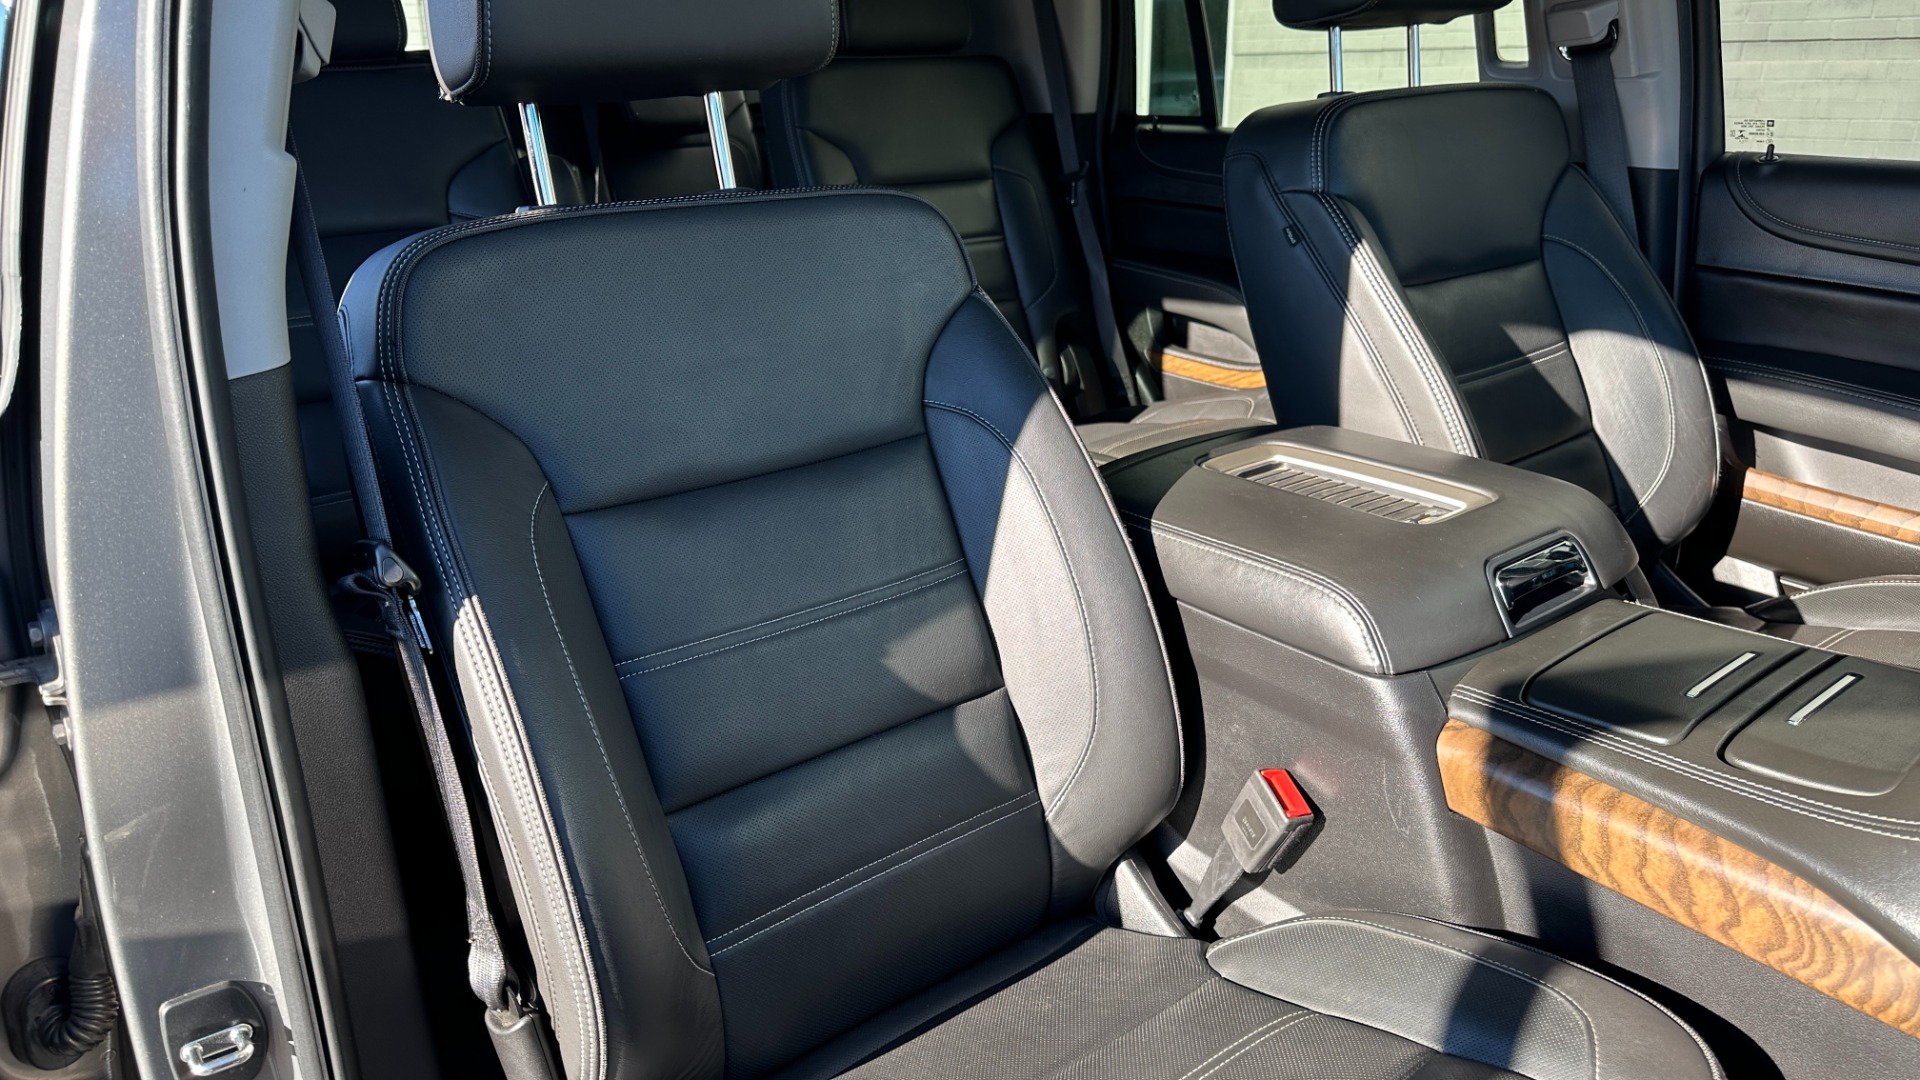 Used 2019 GMC Yukon DENALI ULTIMATE / DVD / CAPTAINS CHAIRS / 3RD ROW / LEATHER / NAV for sale Sold at Formula Imports in Charlotte NC 28227 38